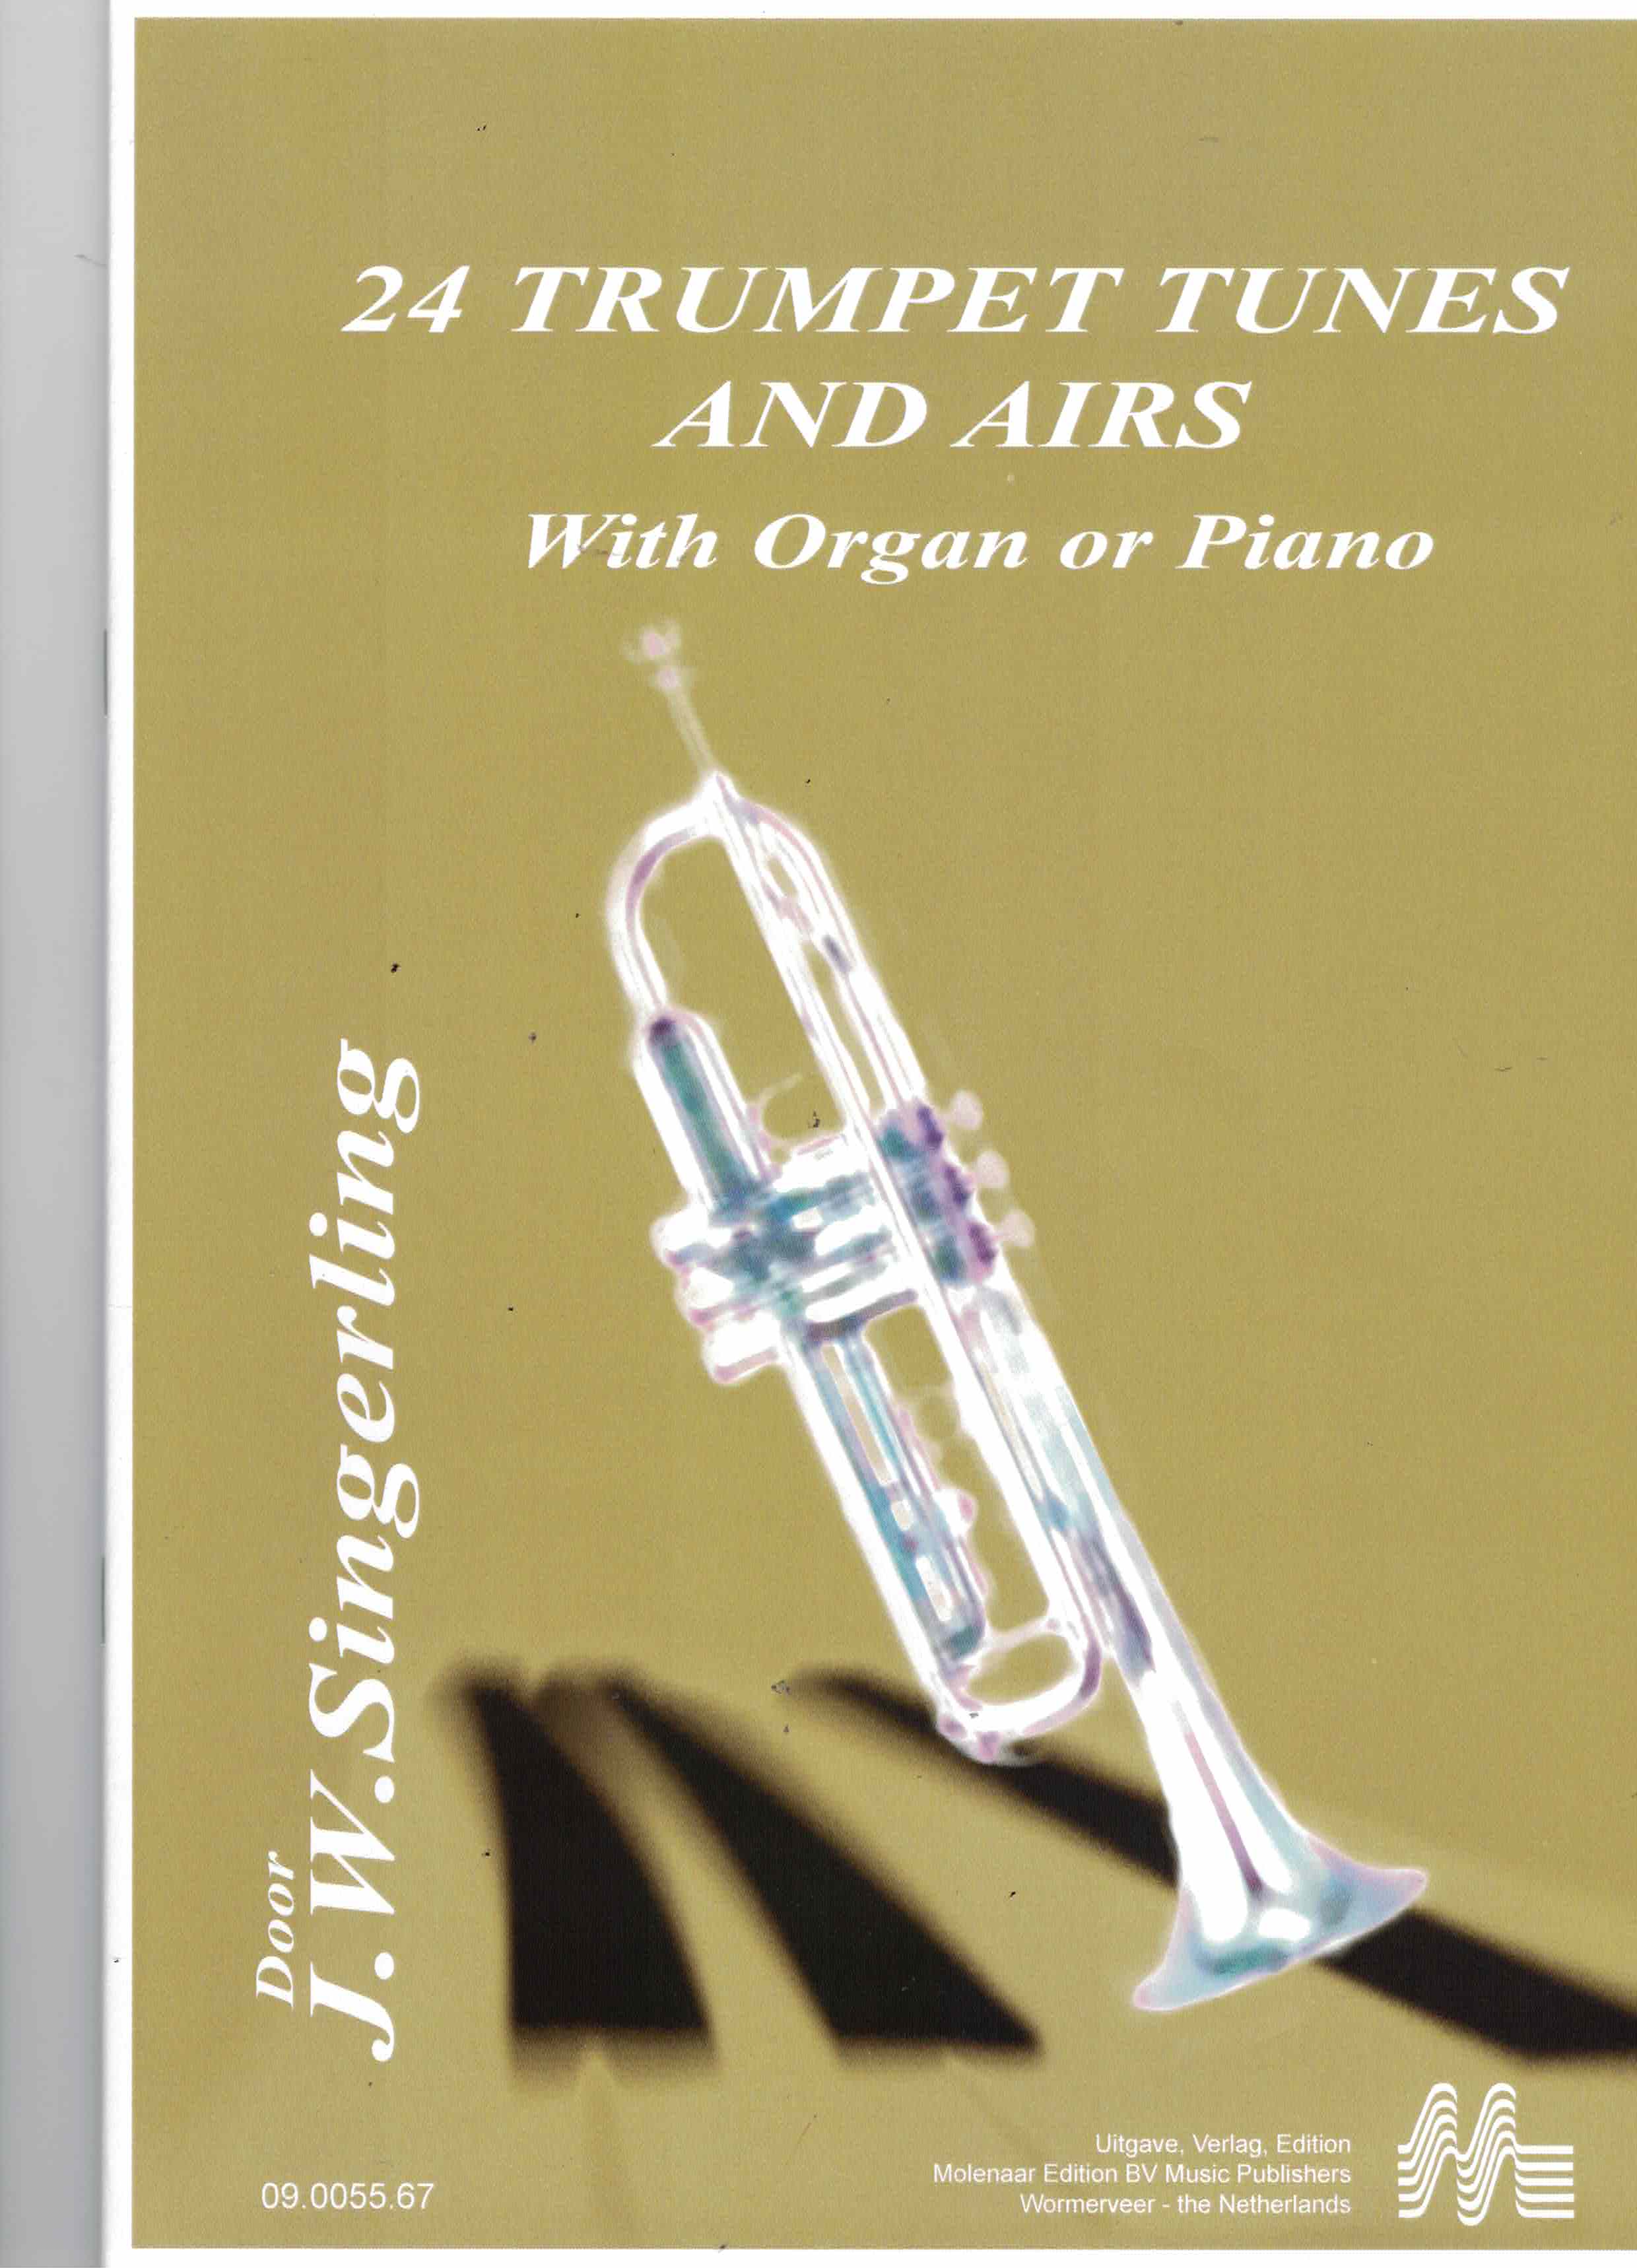 24 Trumpet Tunes and Airs, Trp Org